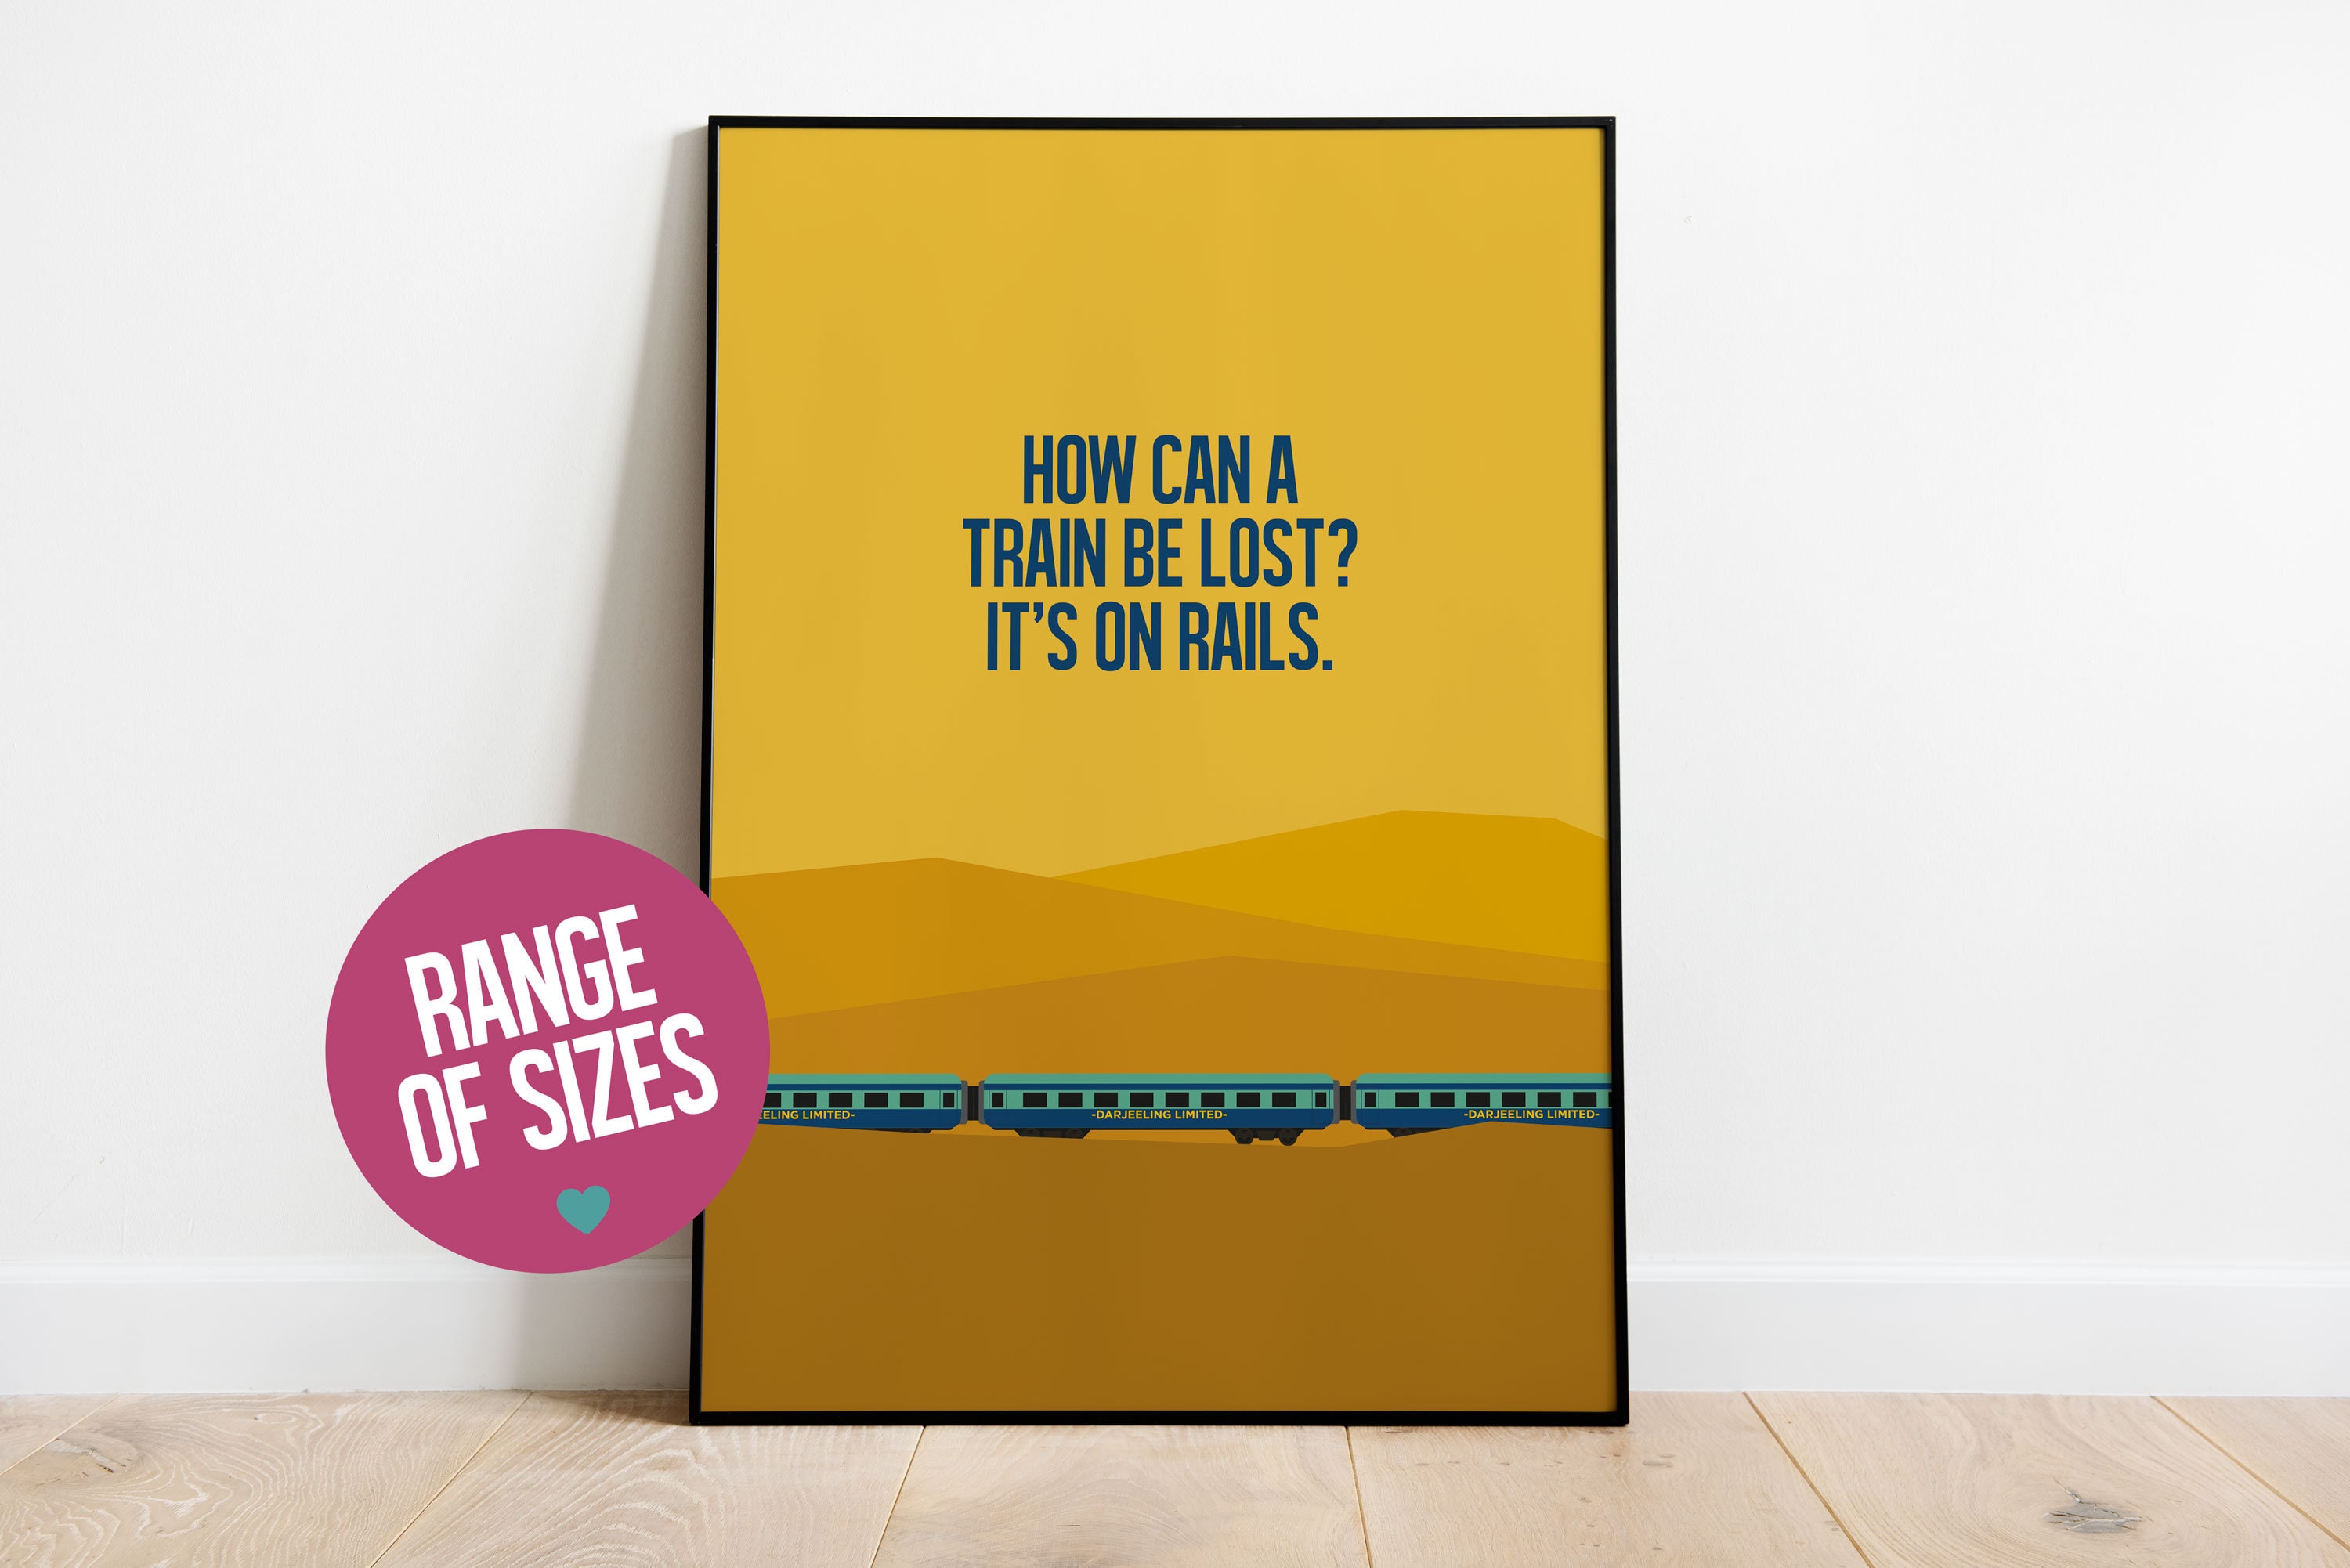 Live Out Your Own Darjeeling Limited Adventure With This Wes